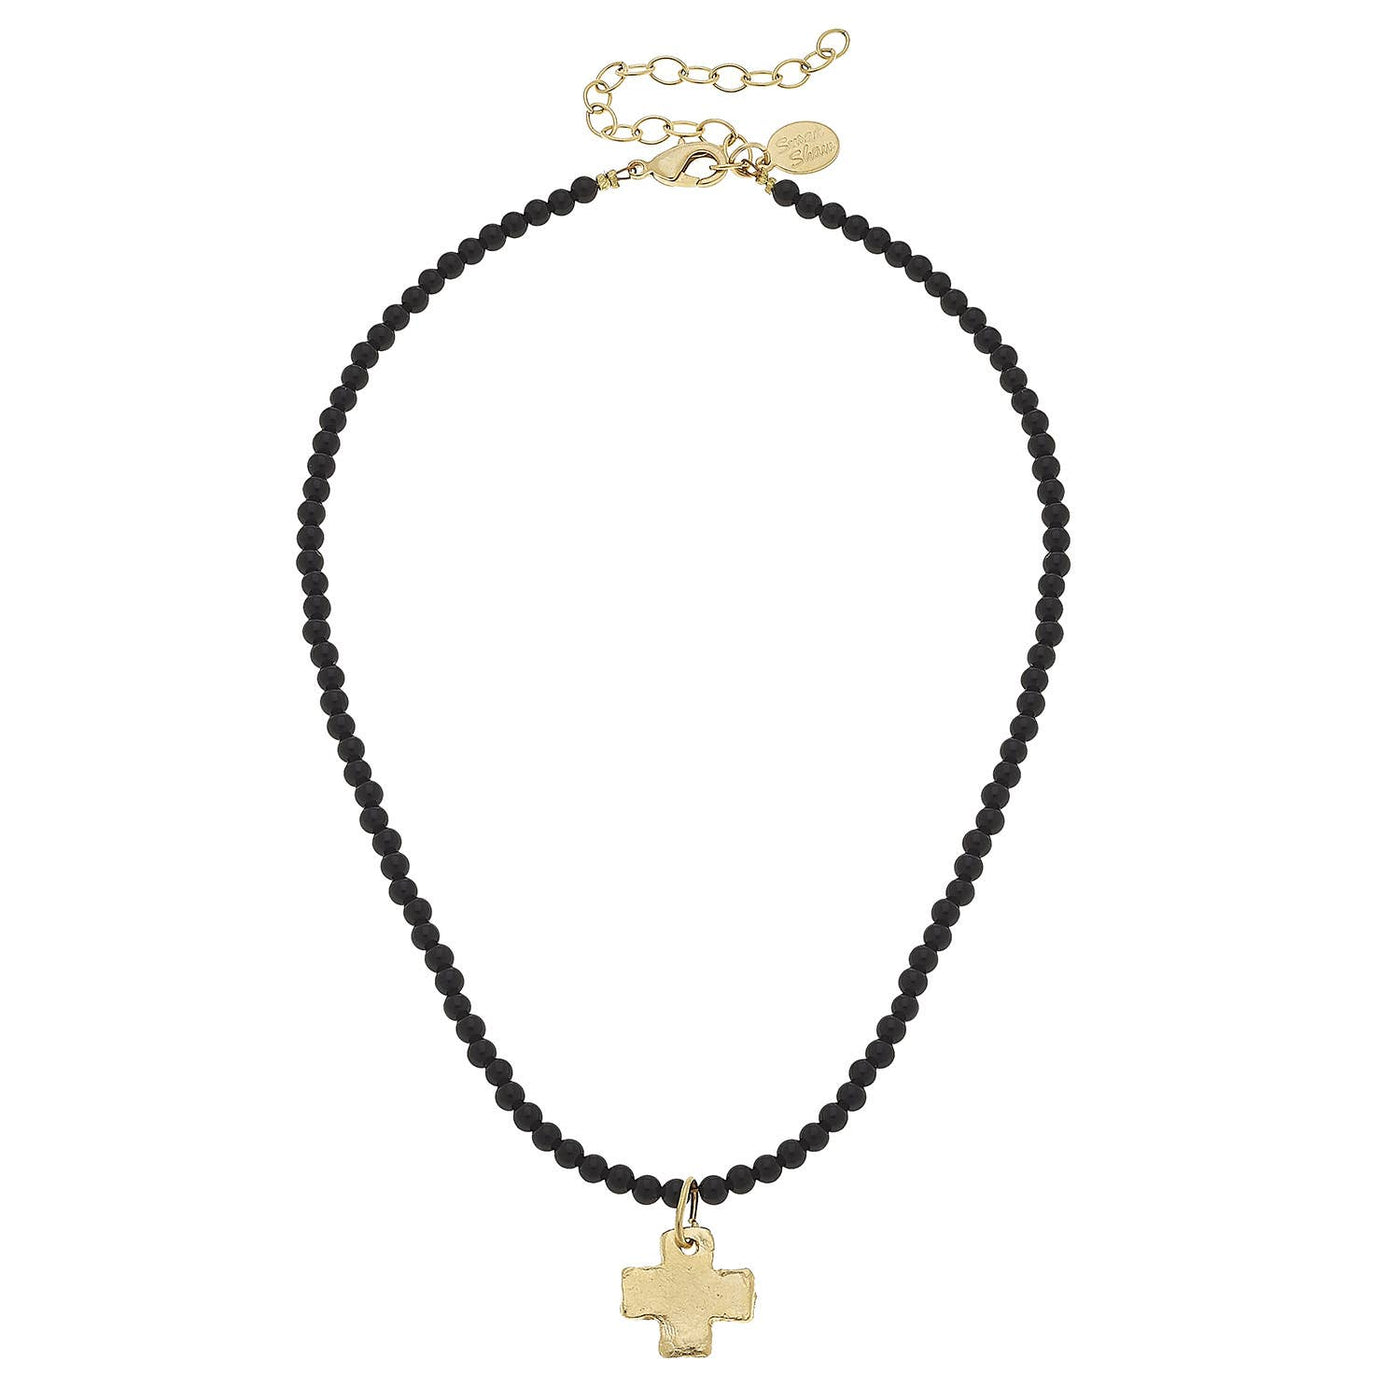 SS Gold Cross on Onyx Beaded Necklace